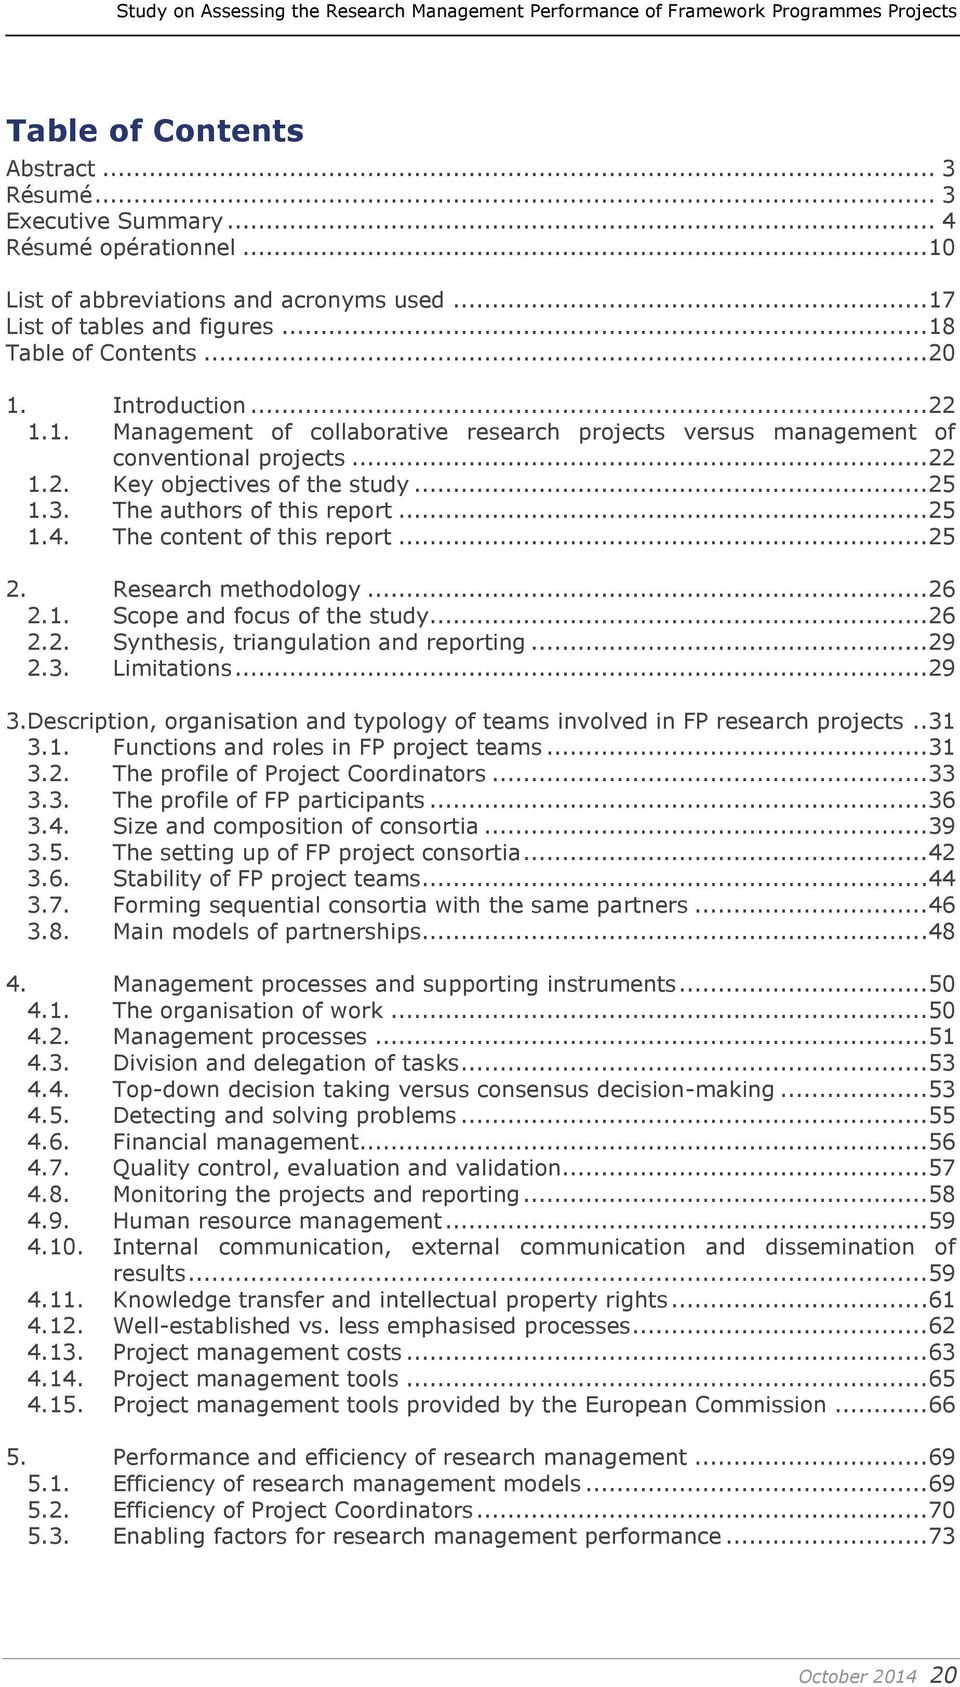 The content of this report...25 2. Research methodology...26 2.1. Scope and focus of the study...26 2.2. Synthesis, triangulation and reporting...29 2.3. Limitations...29 3.